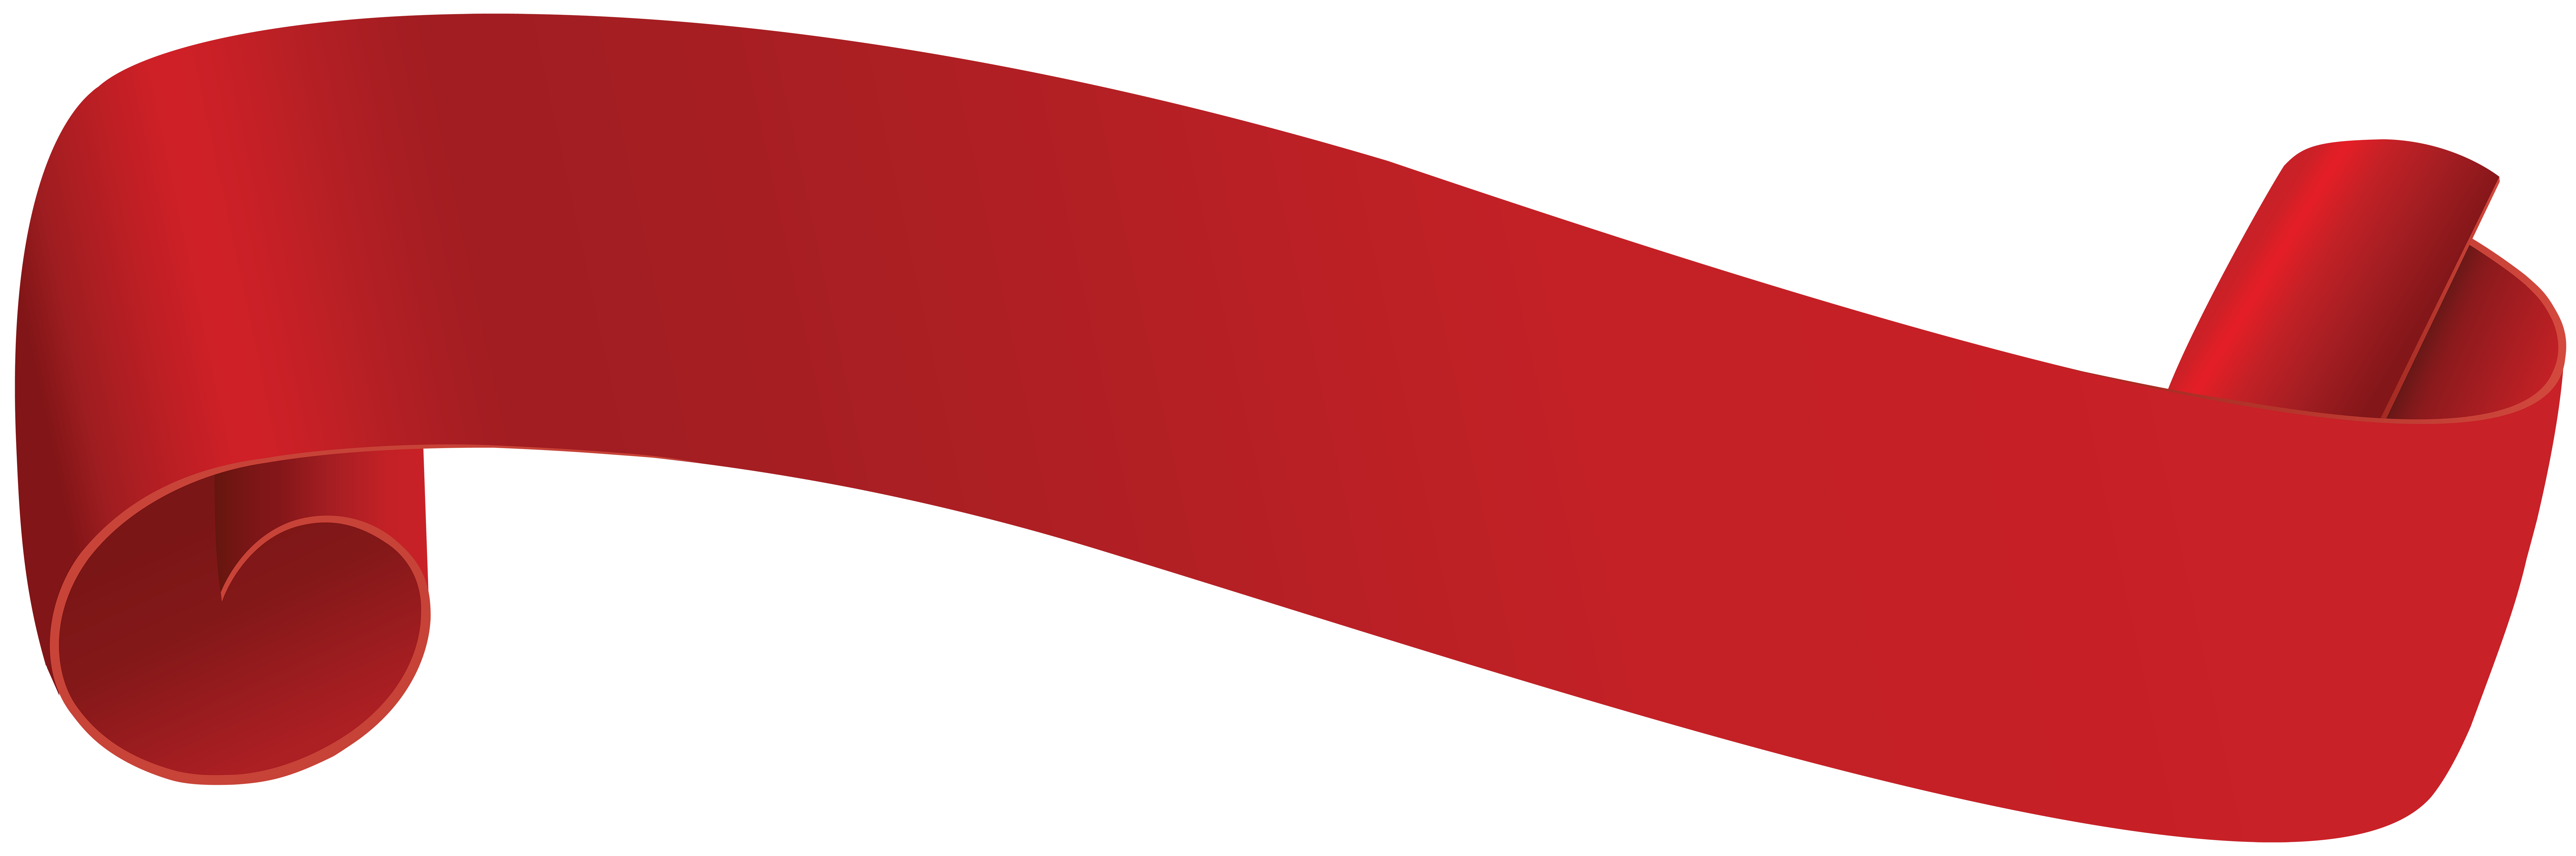 clipart banner red